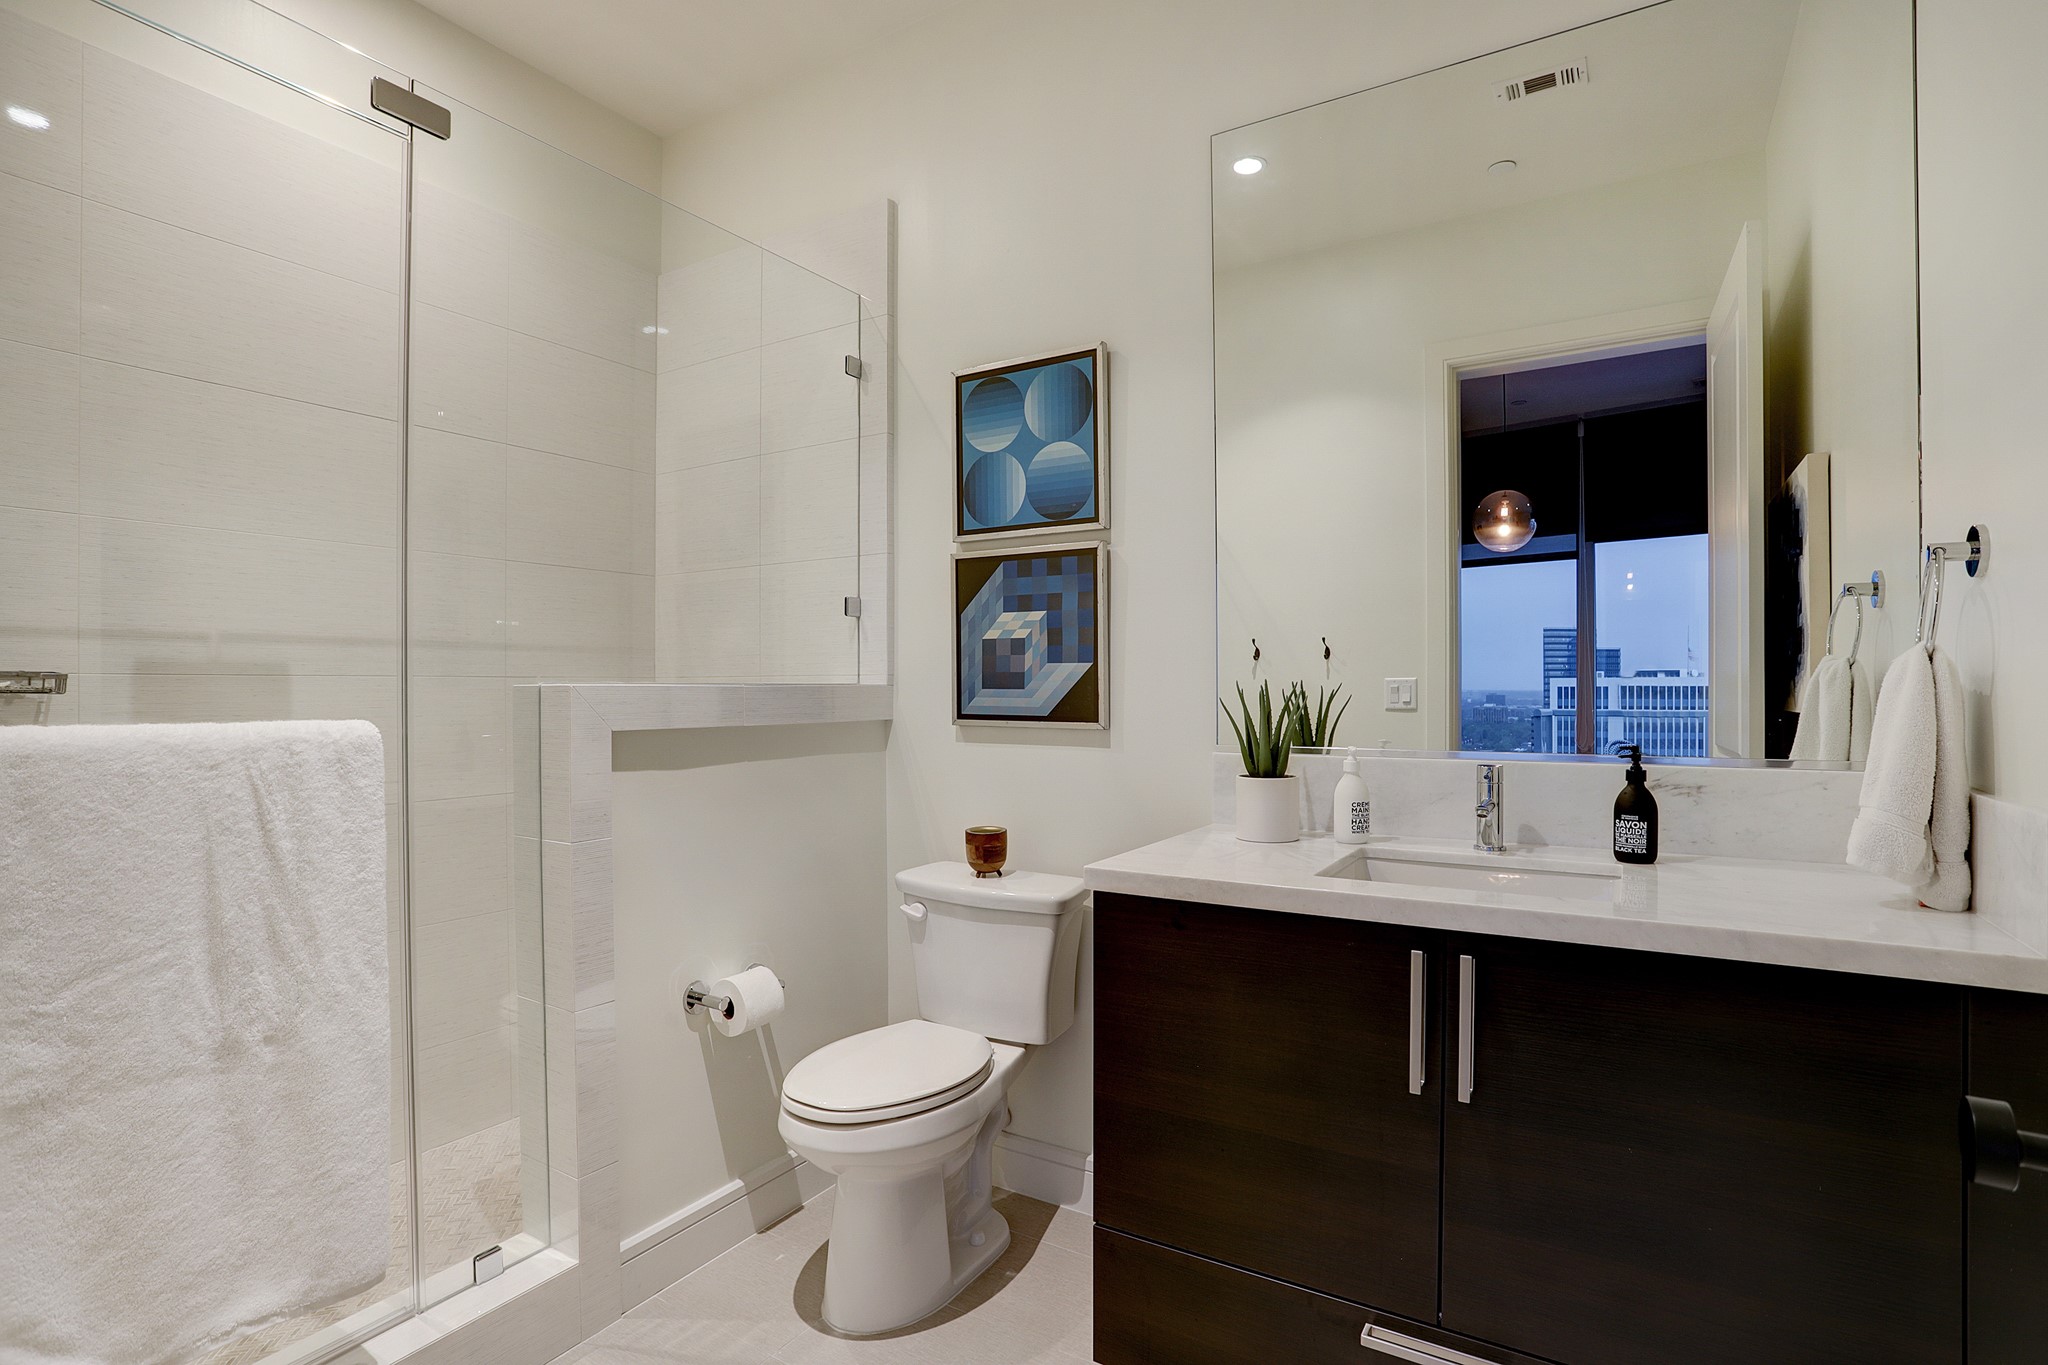 The EN SUITE BATH for the Guest Suite has a sizable walk-in shower clad in tile and a vanity with a quartz countertop.